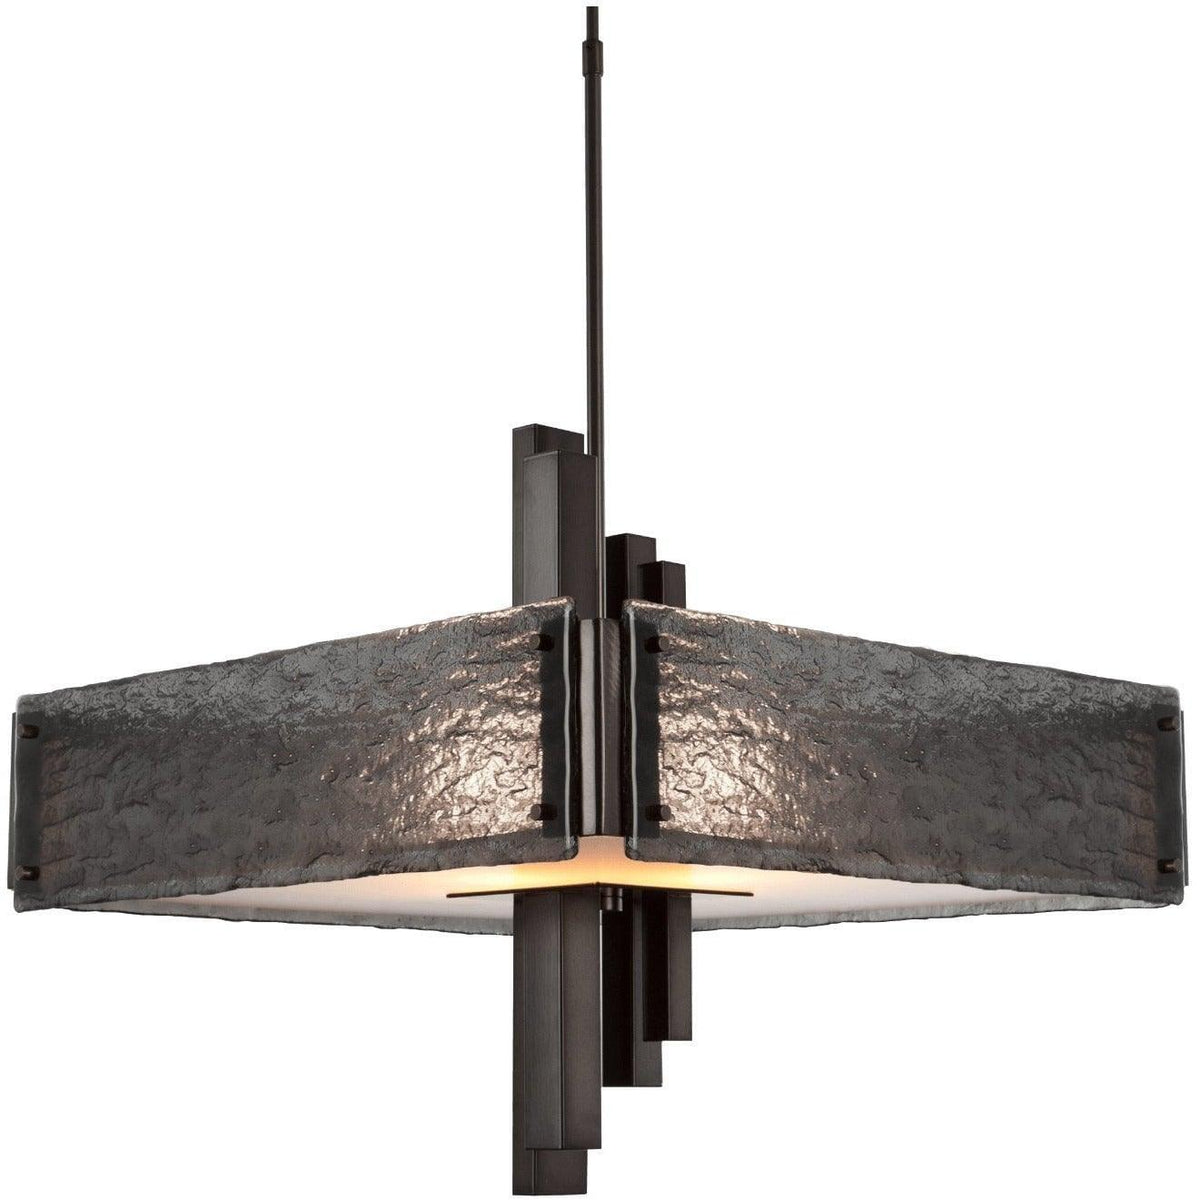 Hammerton Studio - Carlyle Square Chandelier, 24-Inch - CHB0033-0A-GM-SG-001-E2 | Montreal Lighting & Hardware